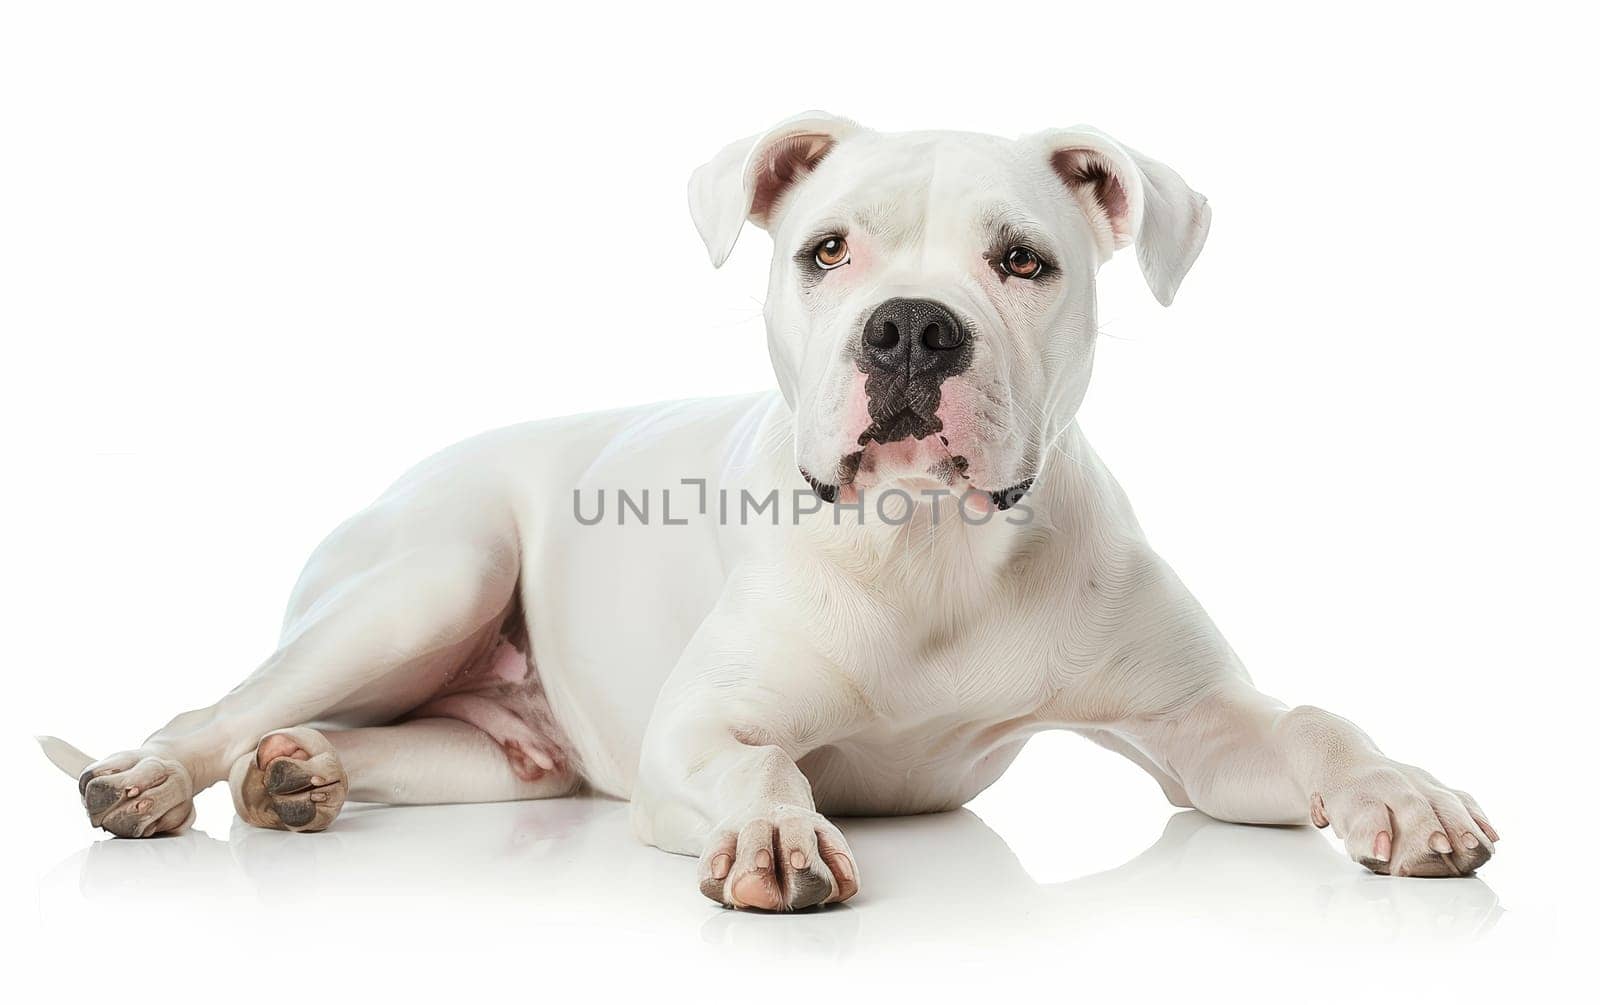 A serene white American Bulldog sits with poise, showcasing its muscular build and gentle demeanor. Its soft white coat provides a stark contrast to the stark white backdrop. by sfinks